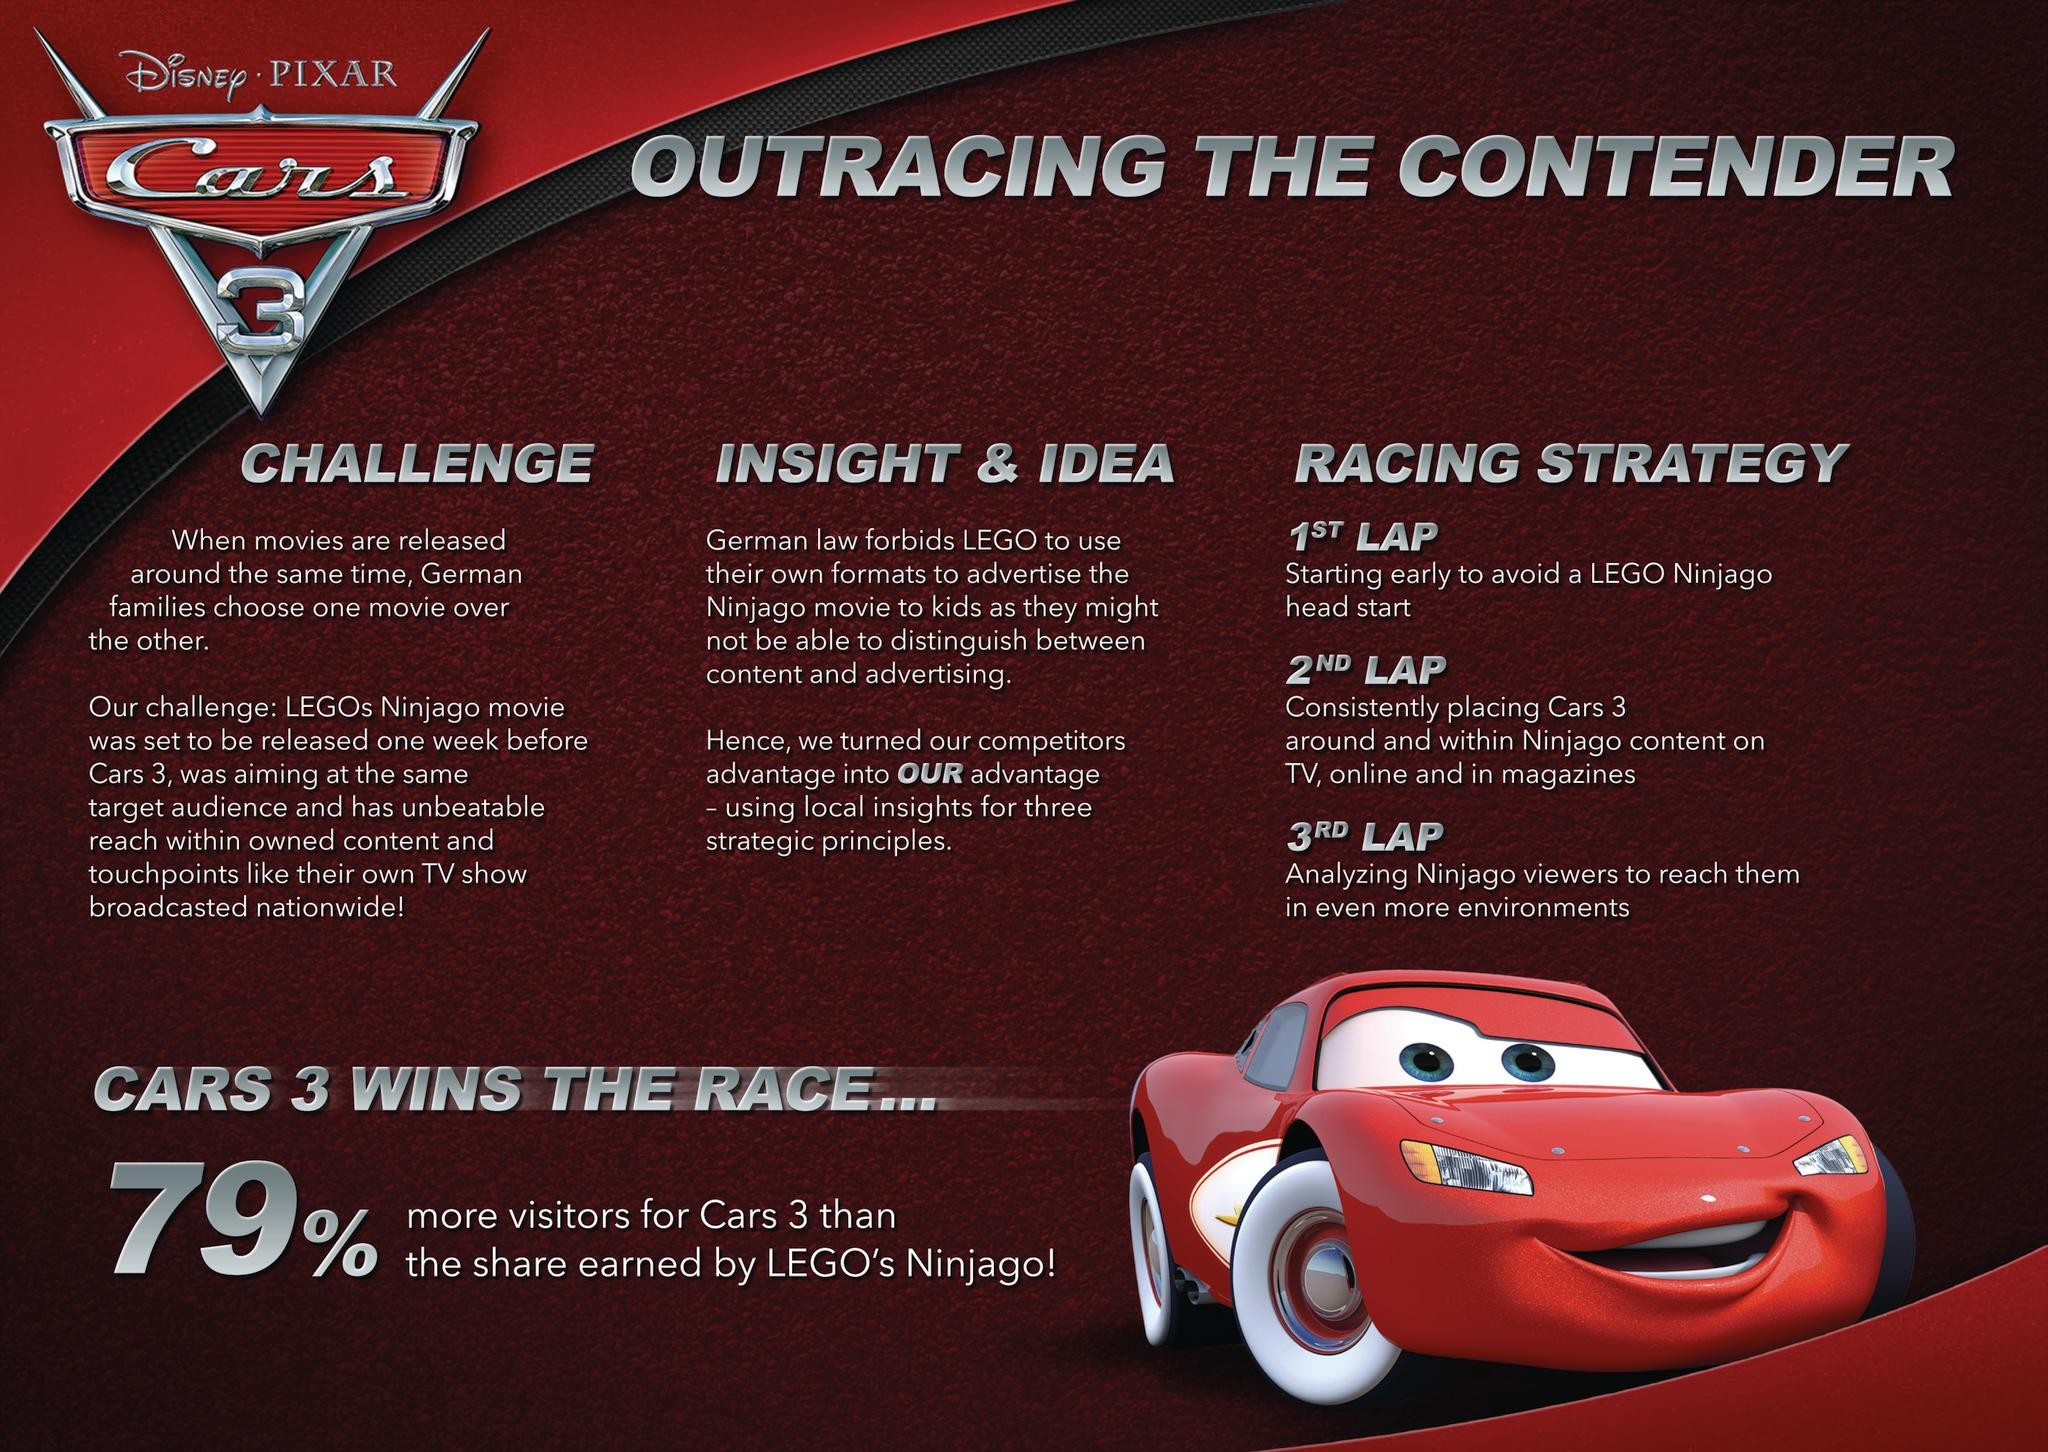 CARS 3 – OUTRACING THE CONTENDER